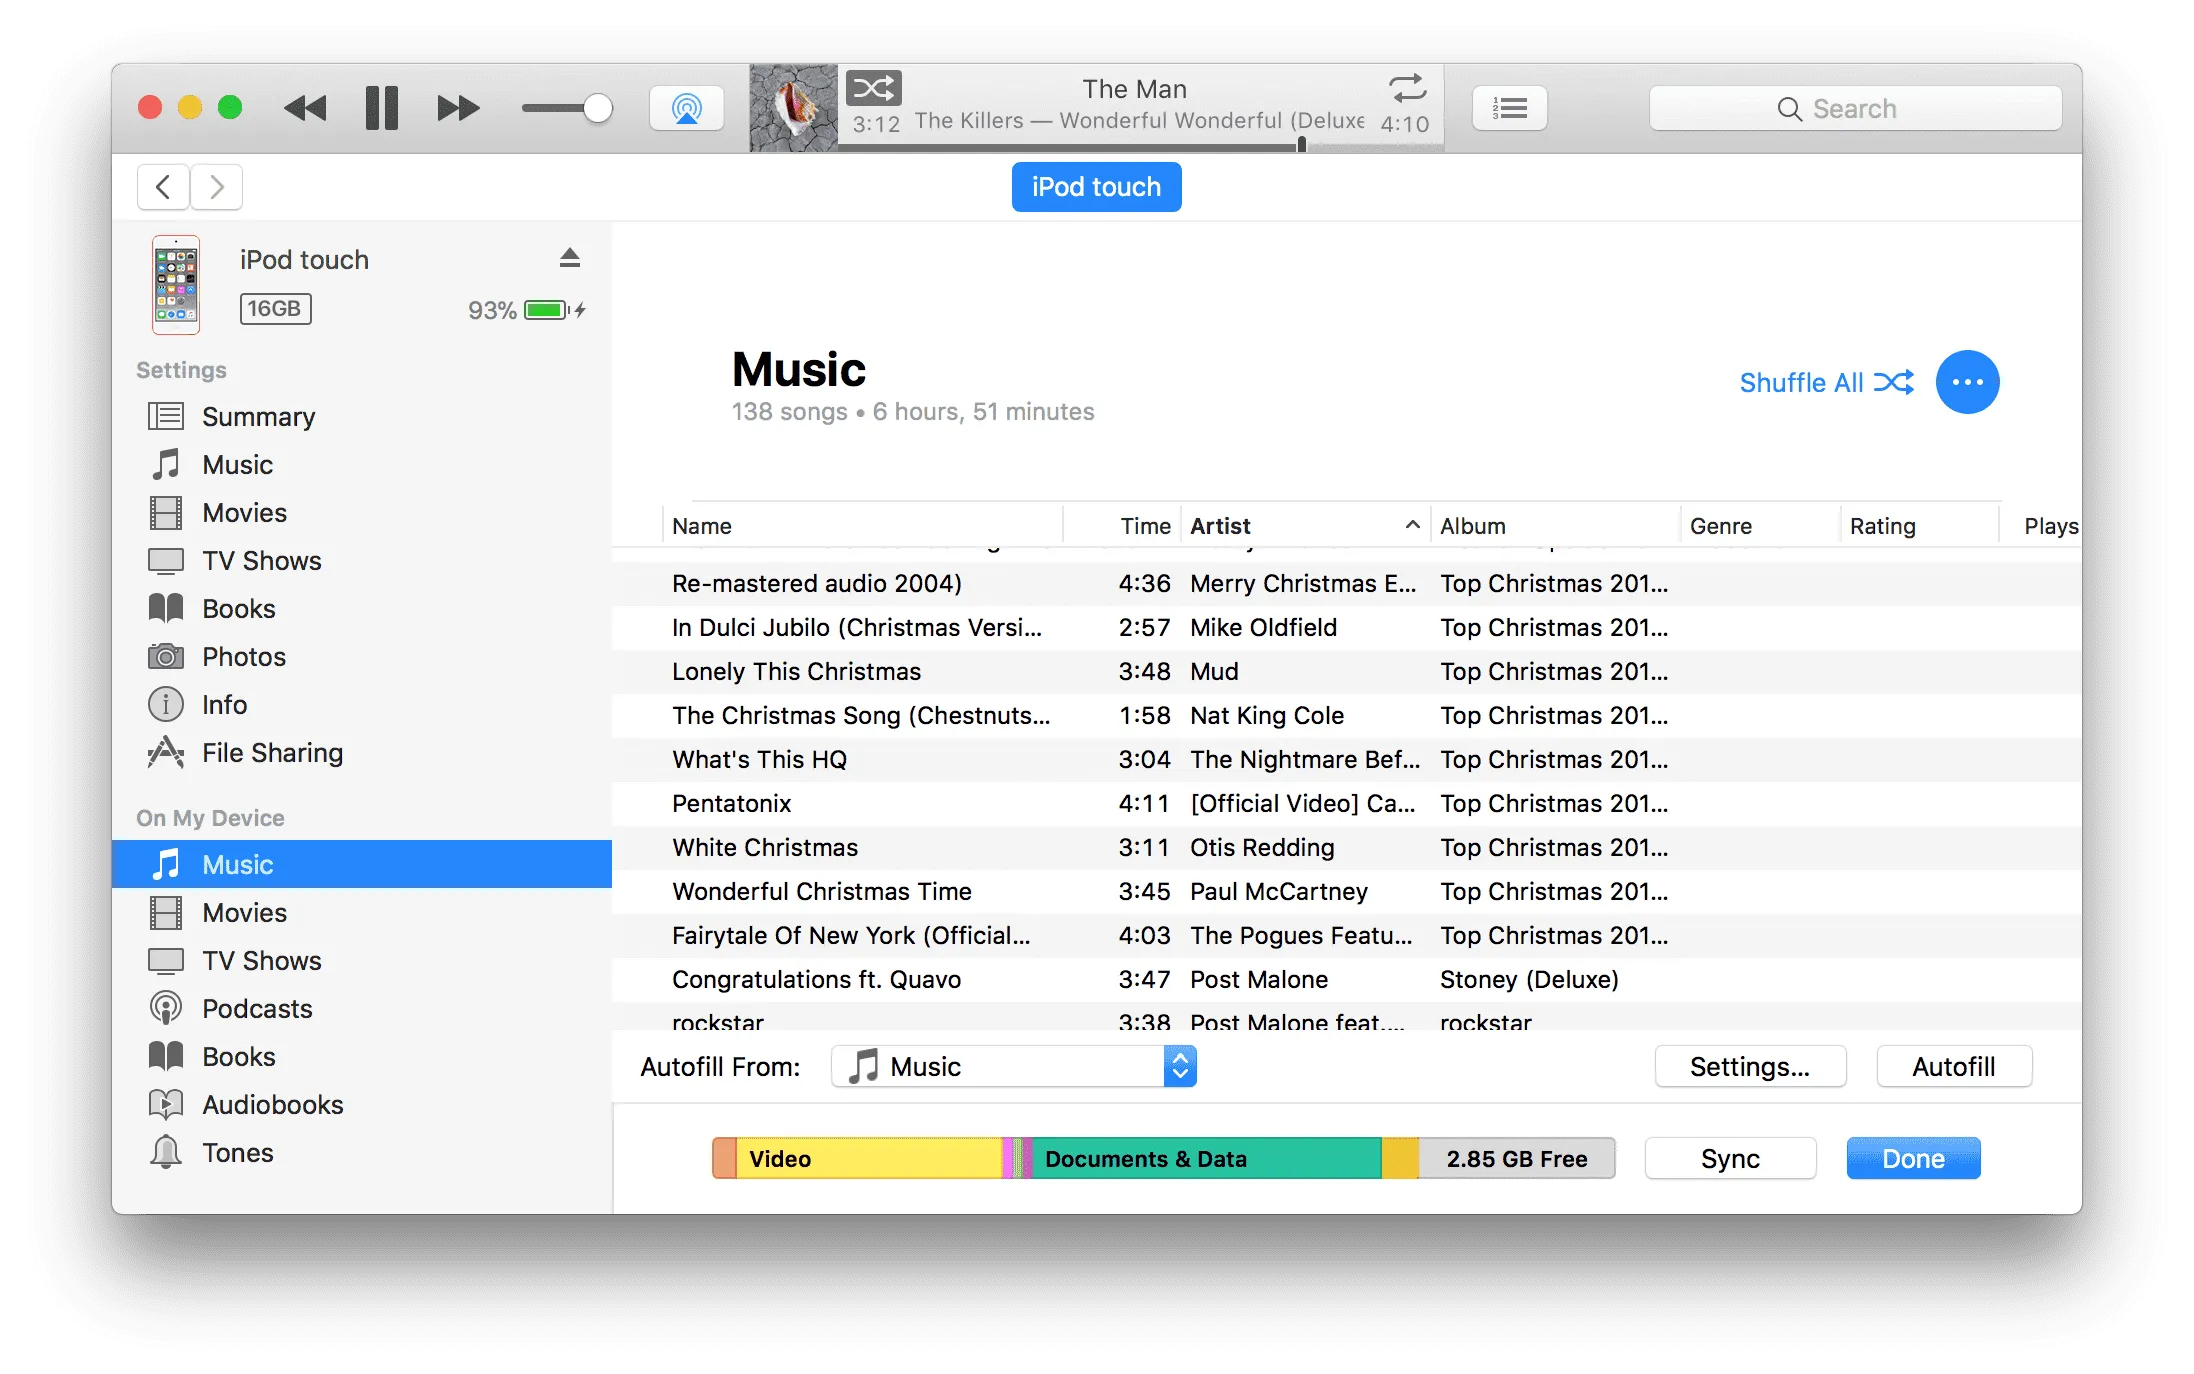 create a custom playlist in iTunes and sync it